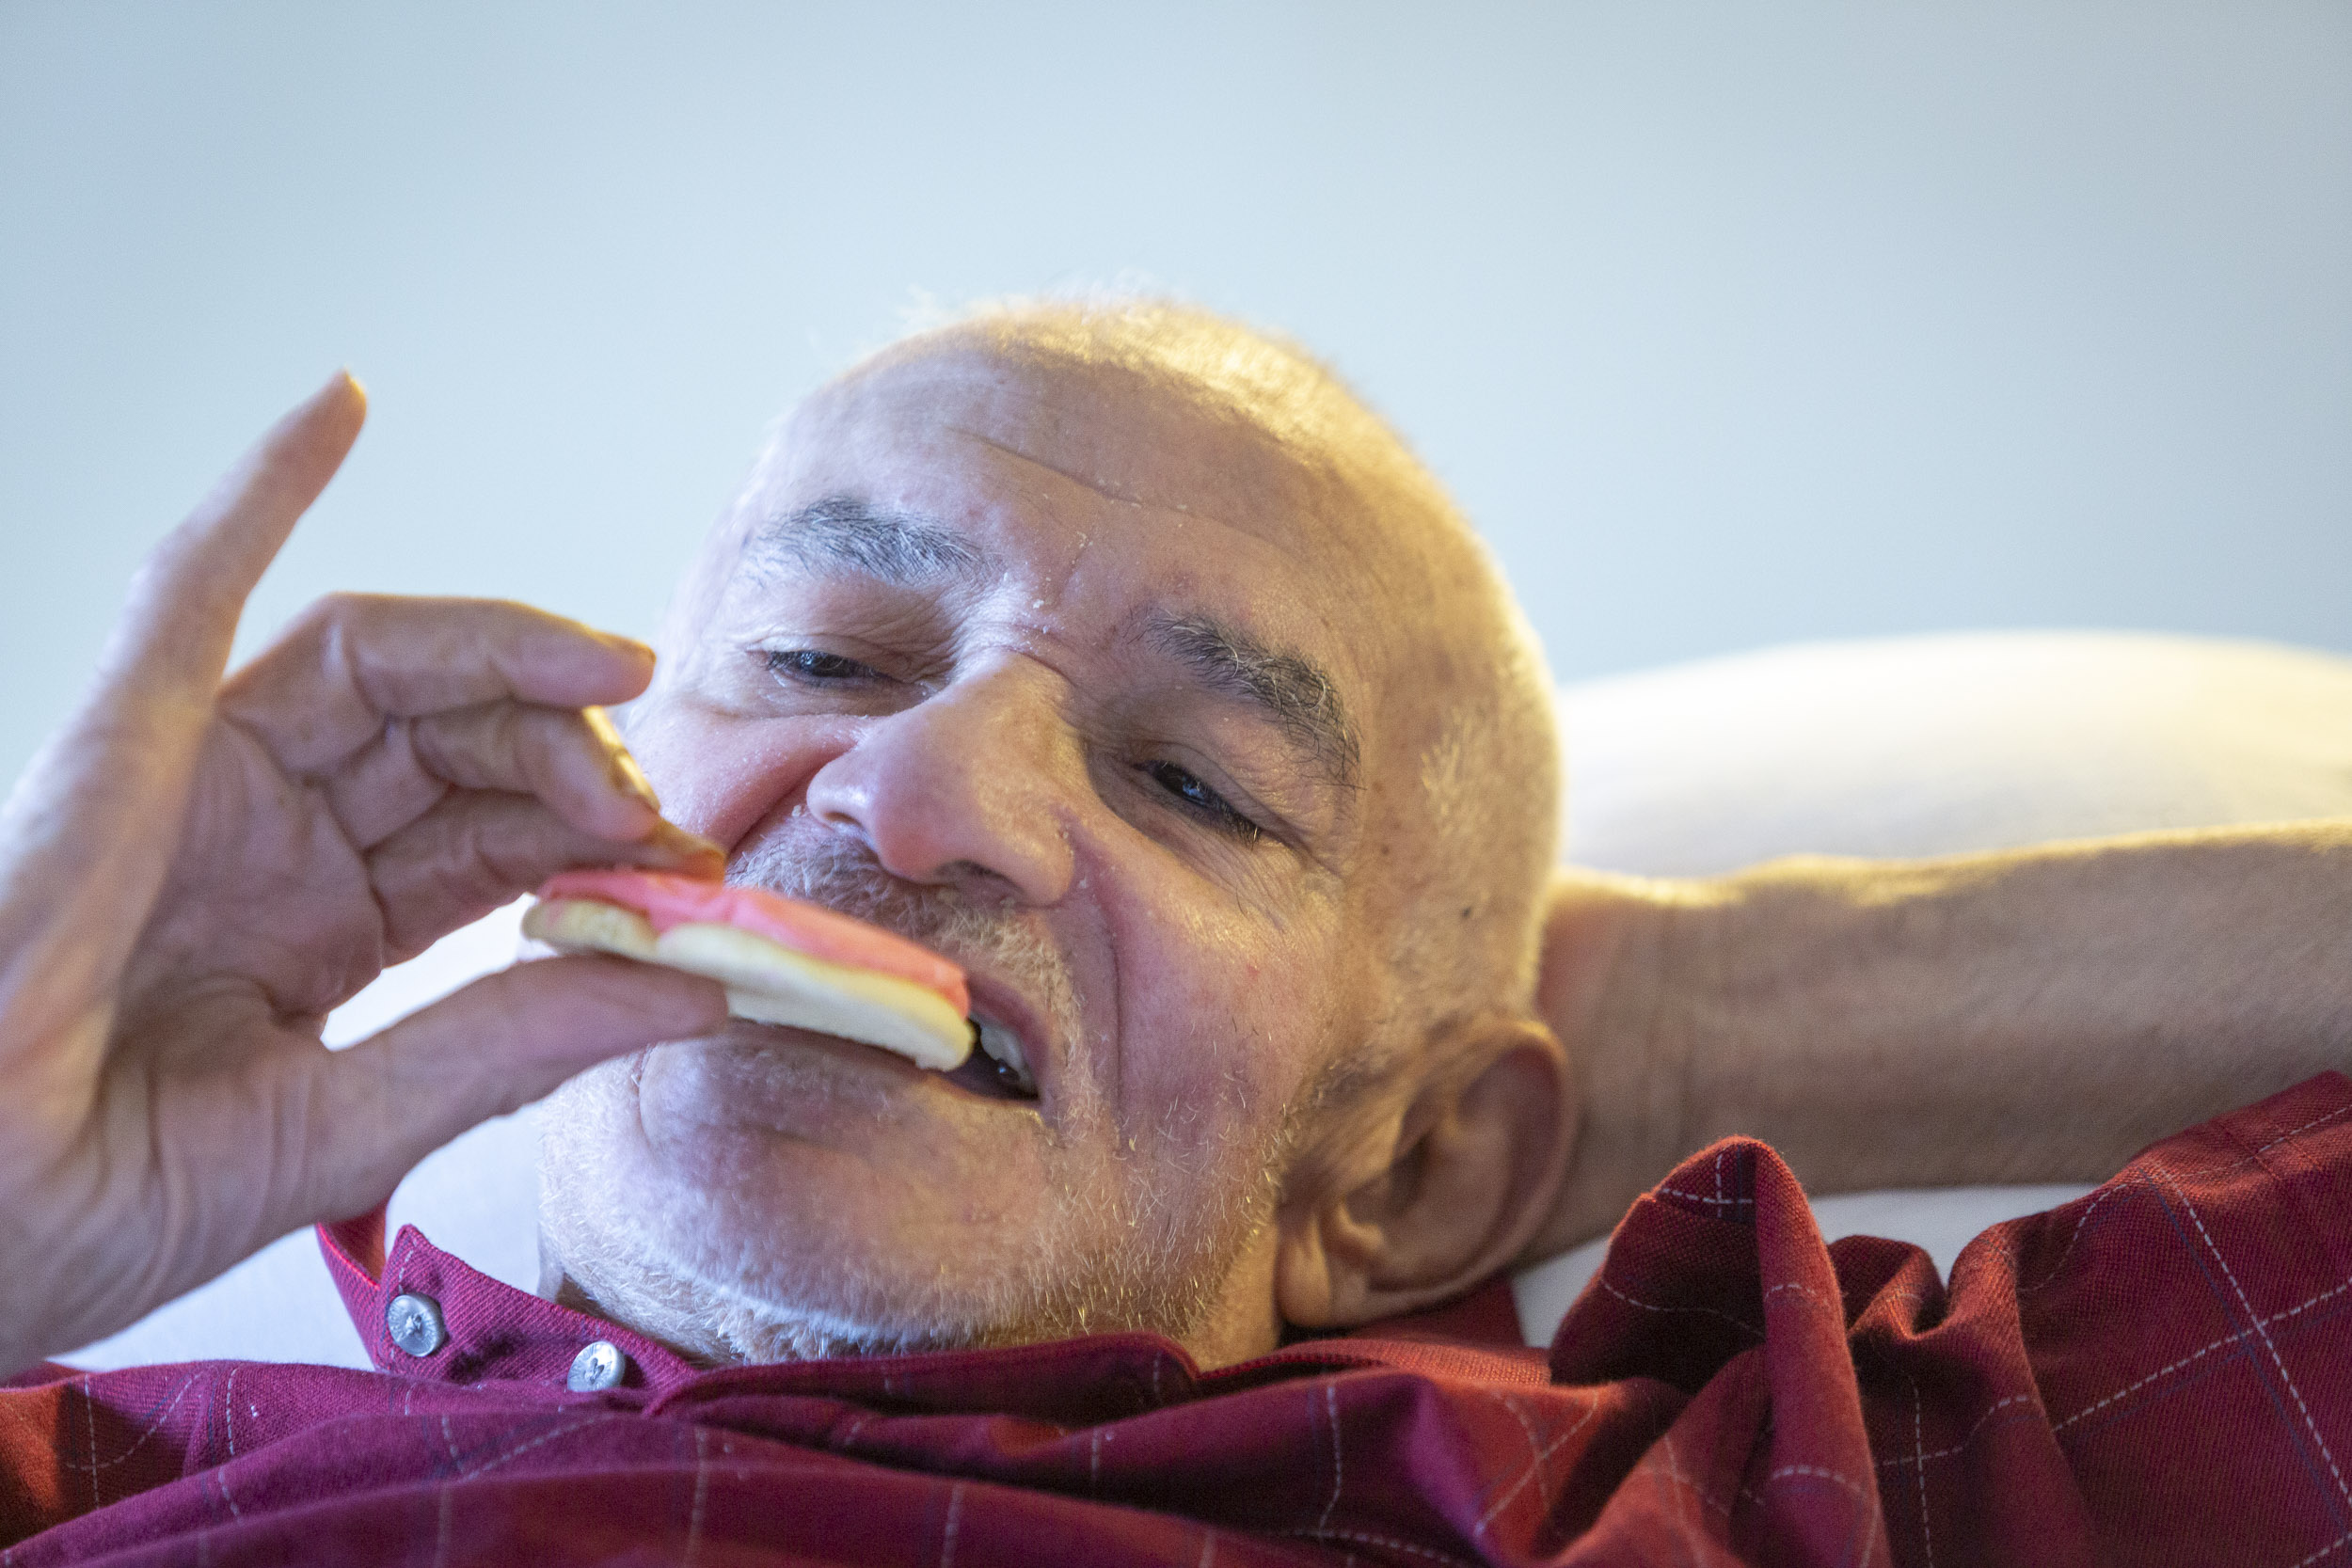  A military veteran takes a bite of a cookie from Cheryl's Cookies at the Armed Forces Retirement Home on Valentine’s Day on Thursday, Feb. 14, 2019 in Washington, DC. 